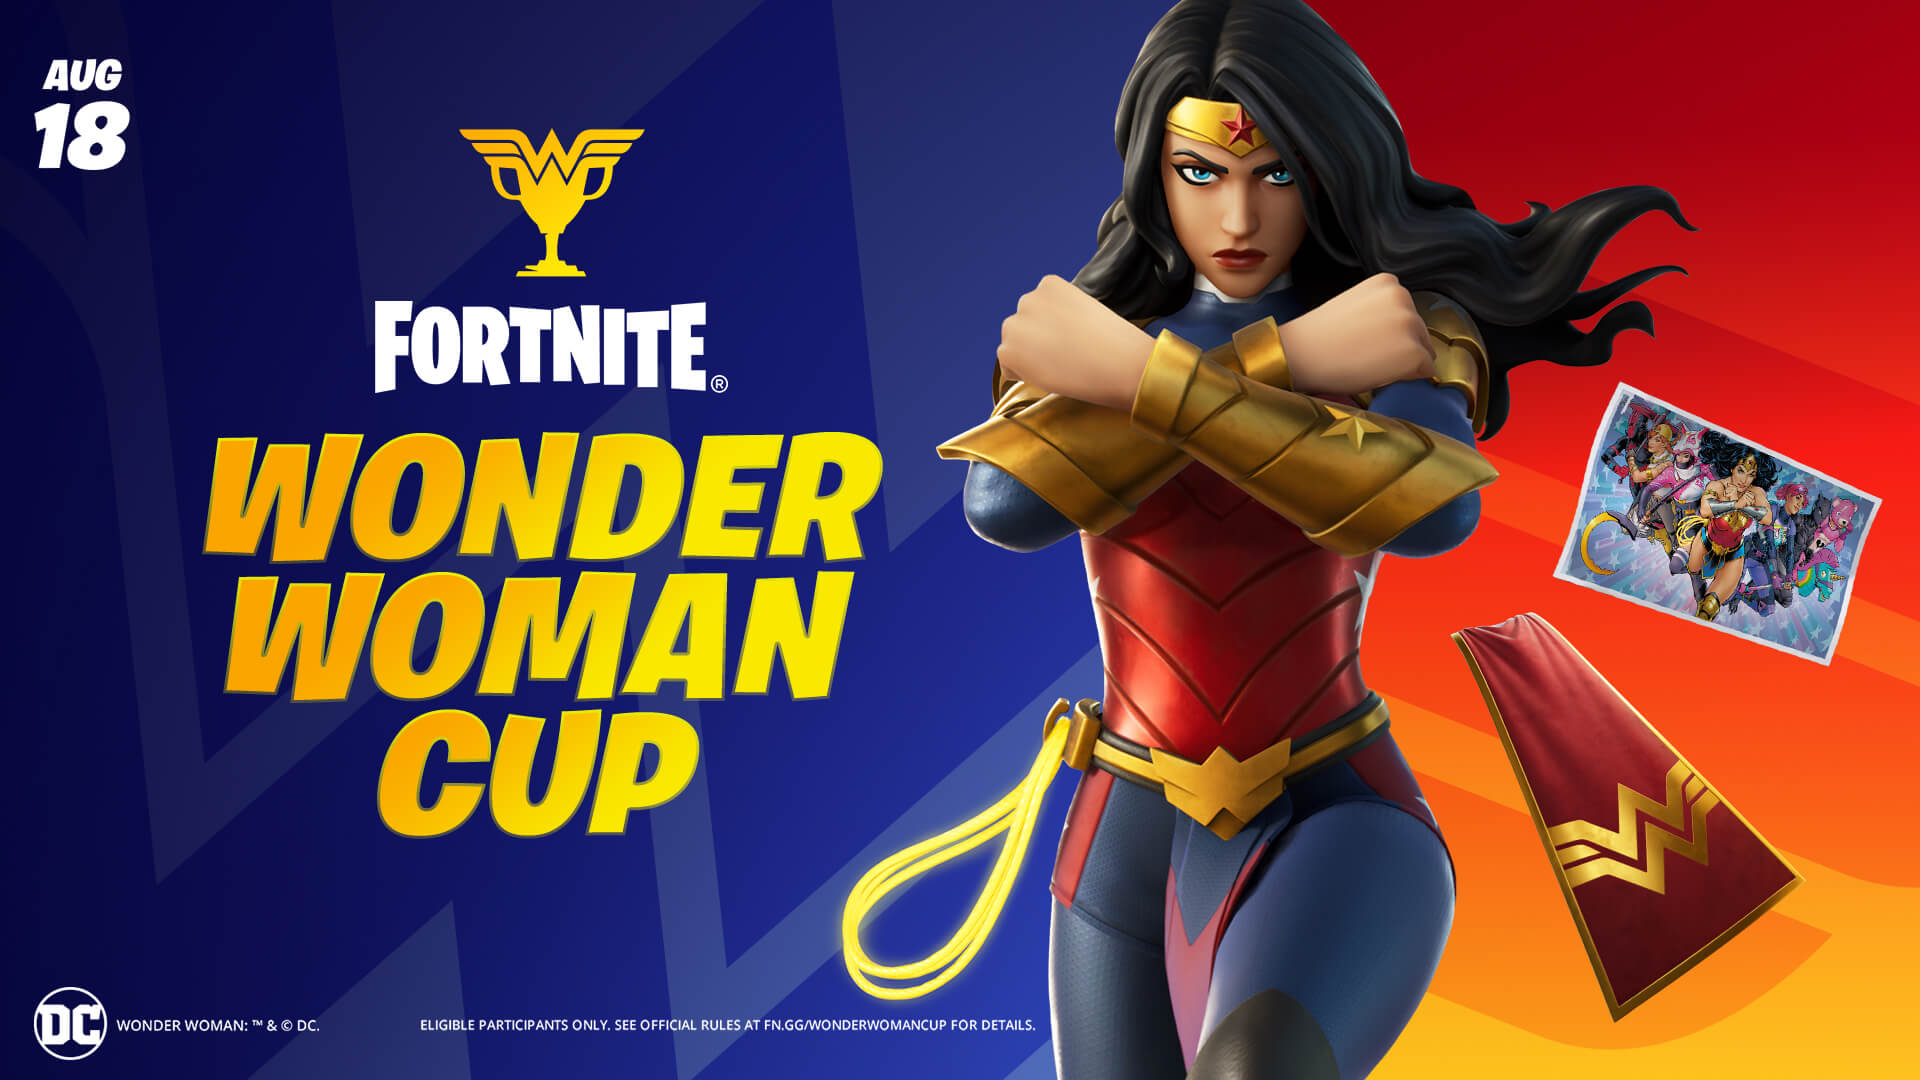 From Paradise Island to the Fortnite Island Woman Arrives in Fortnite